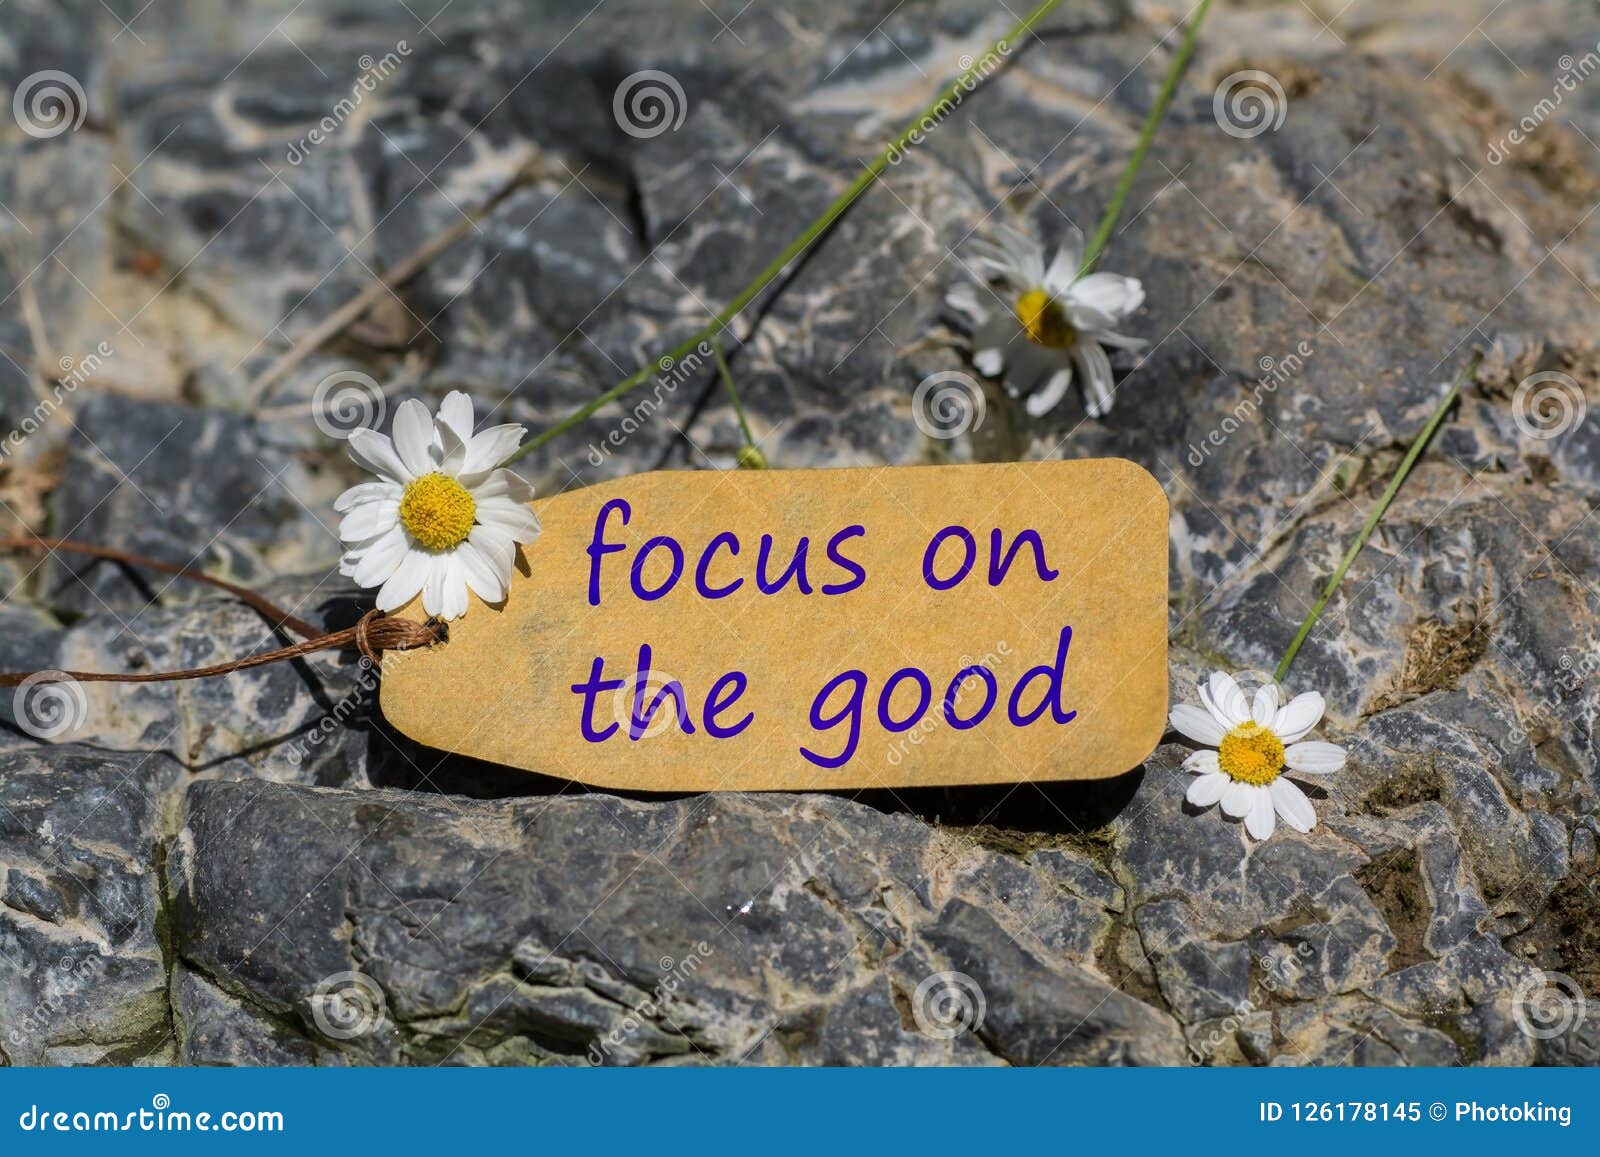 focus on the good label